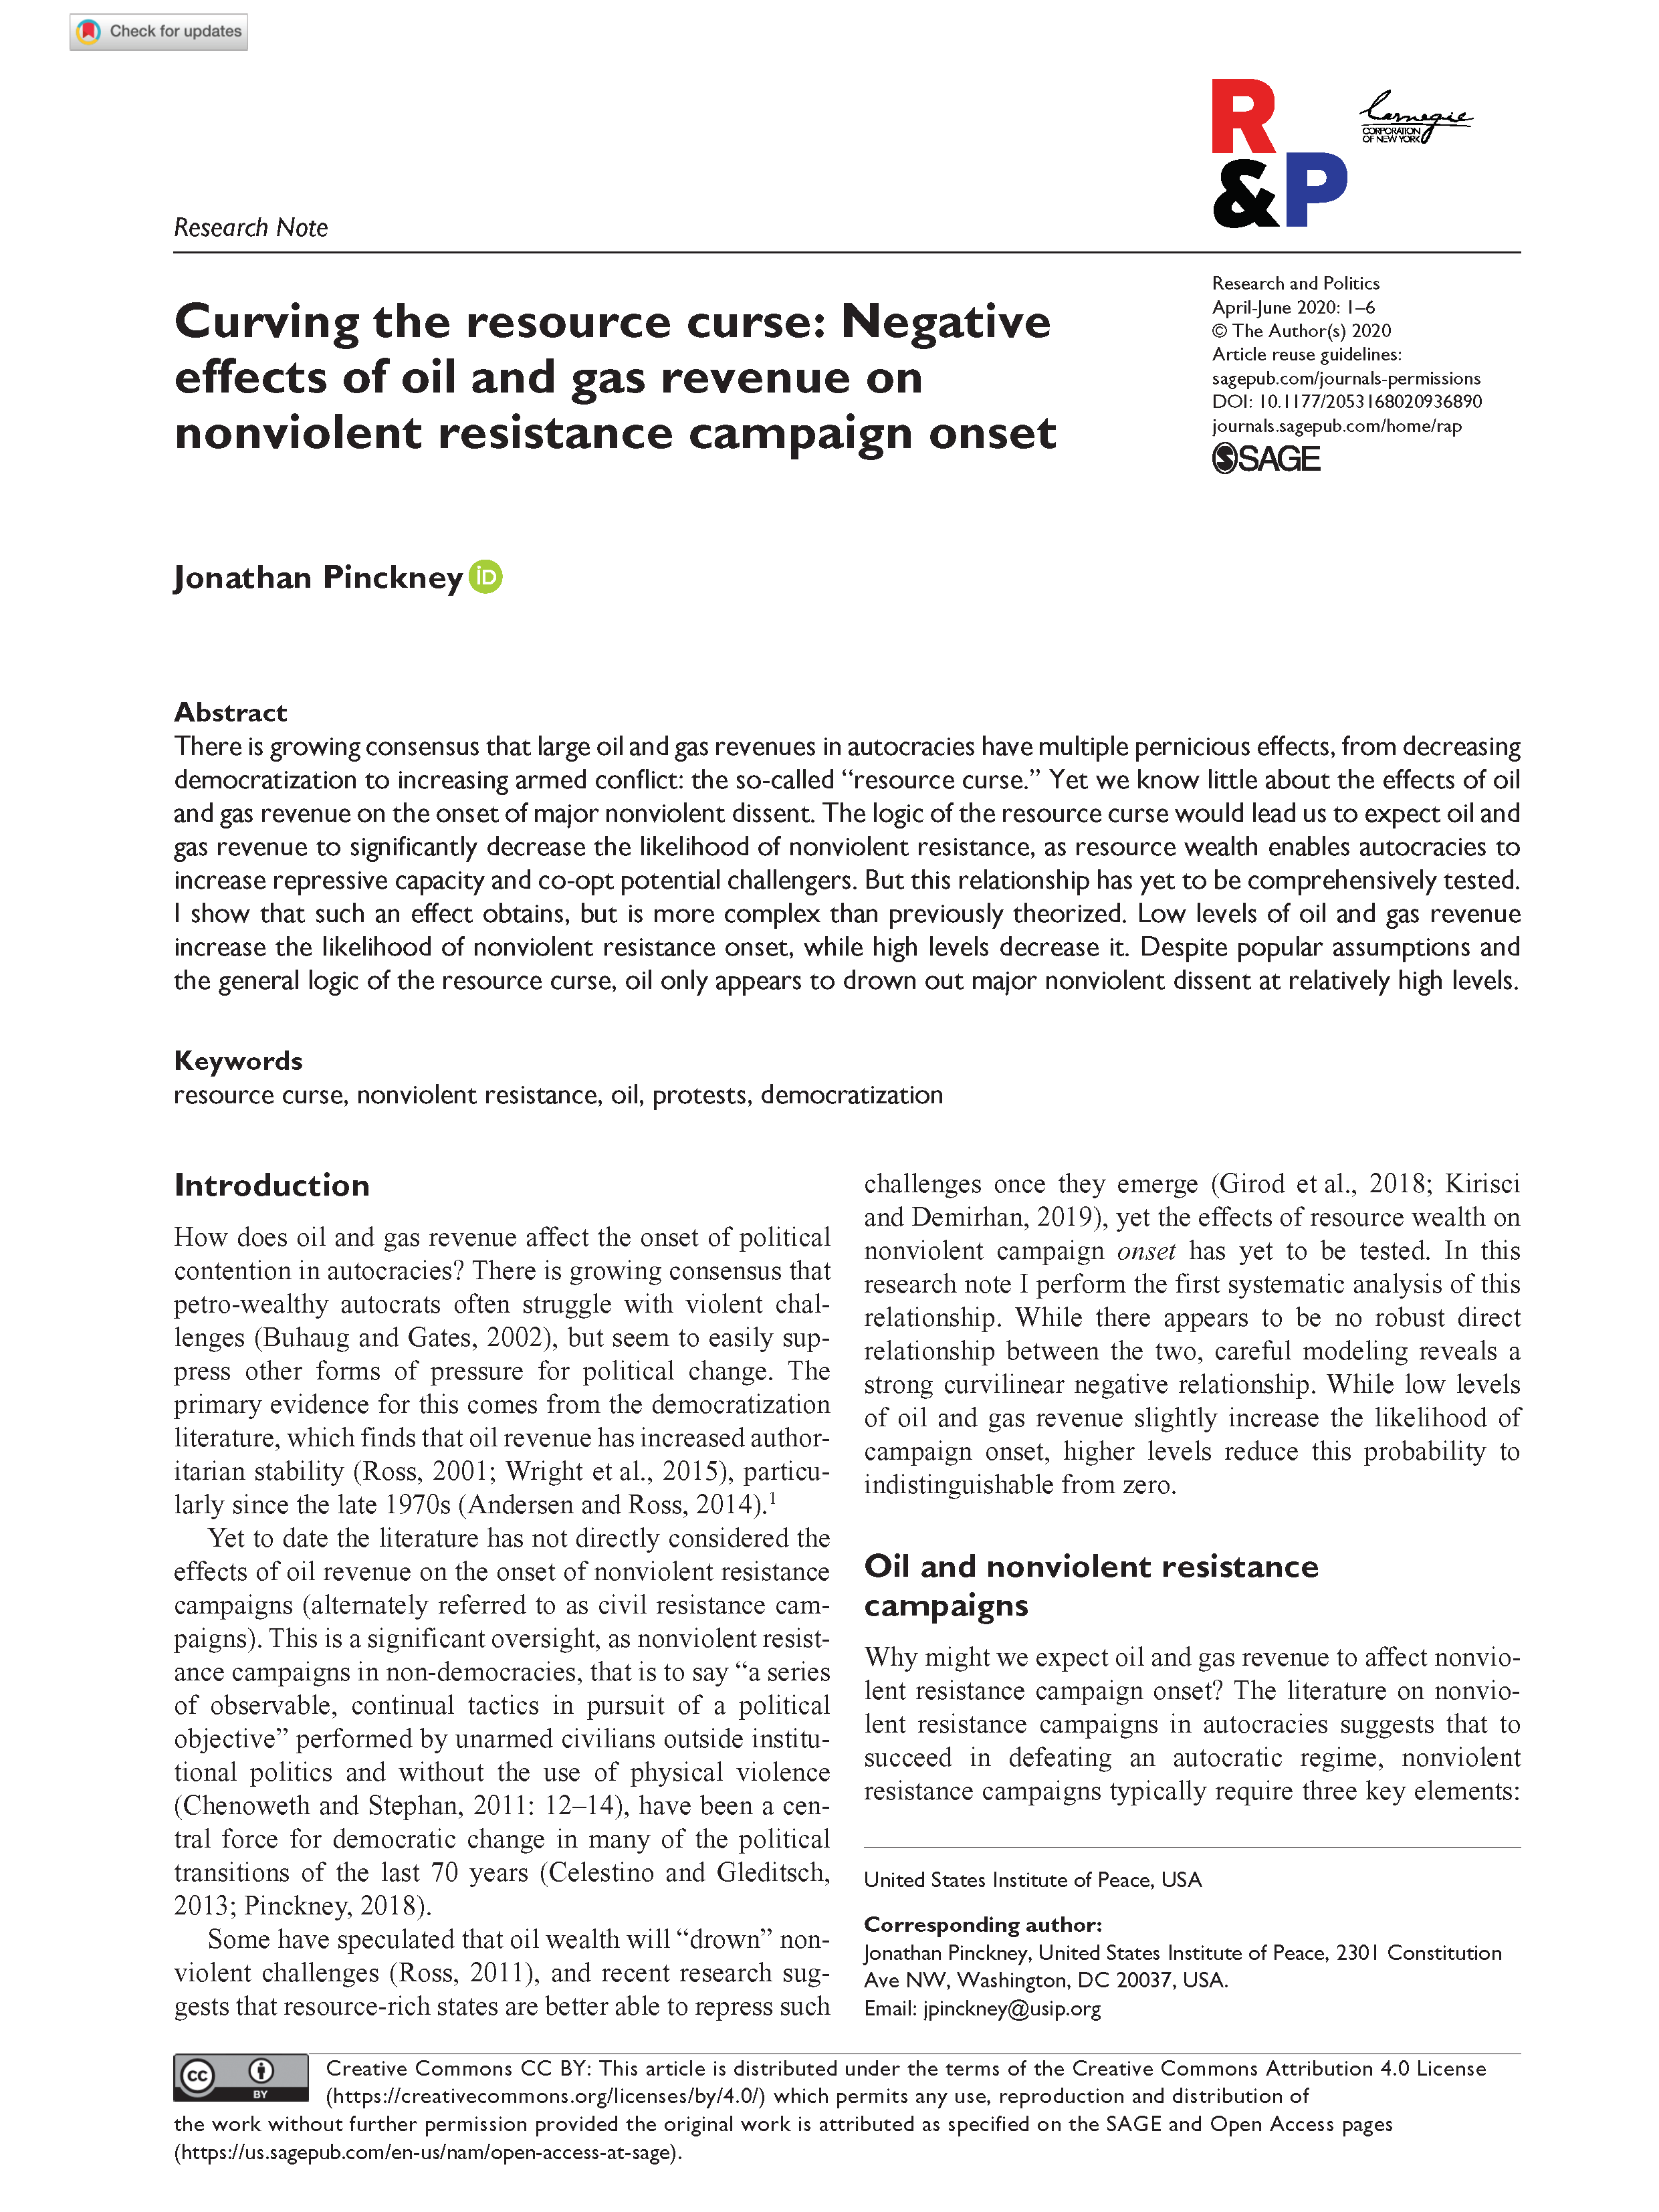 Curving the resource curse: Negative effects of oil and gas revenue on nonviolent resistance campaign onset